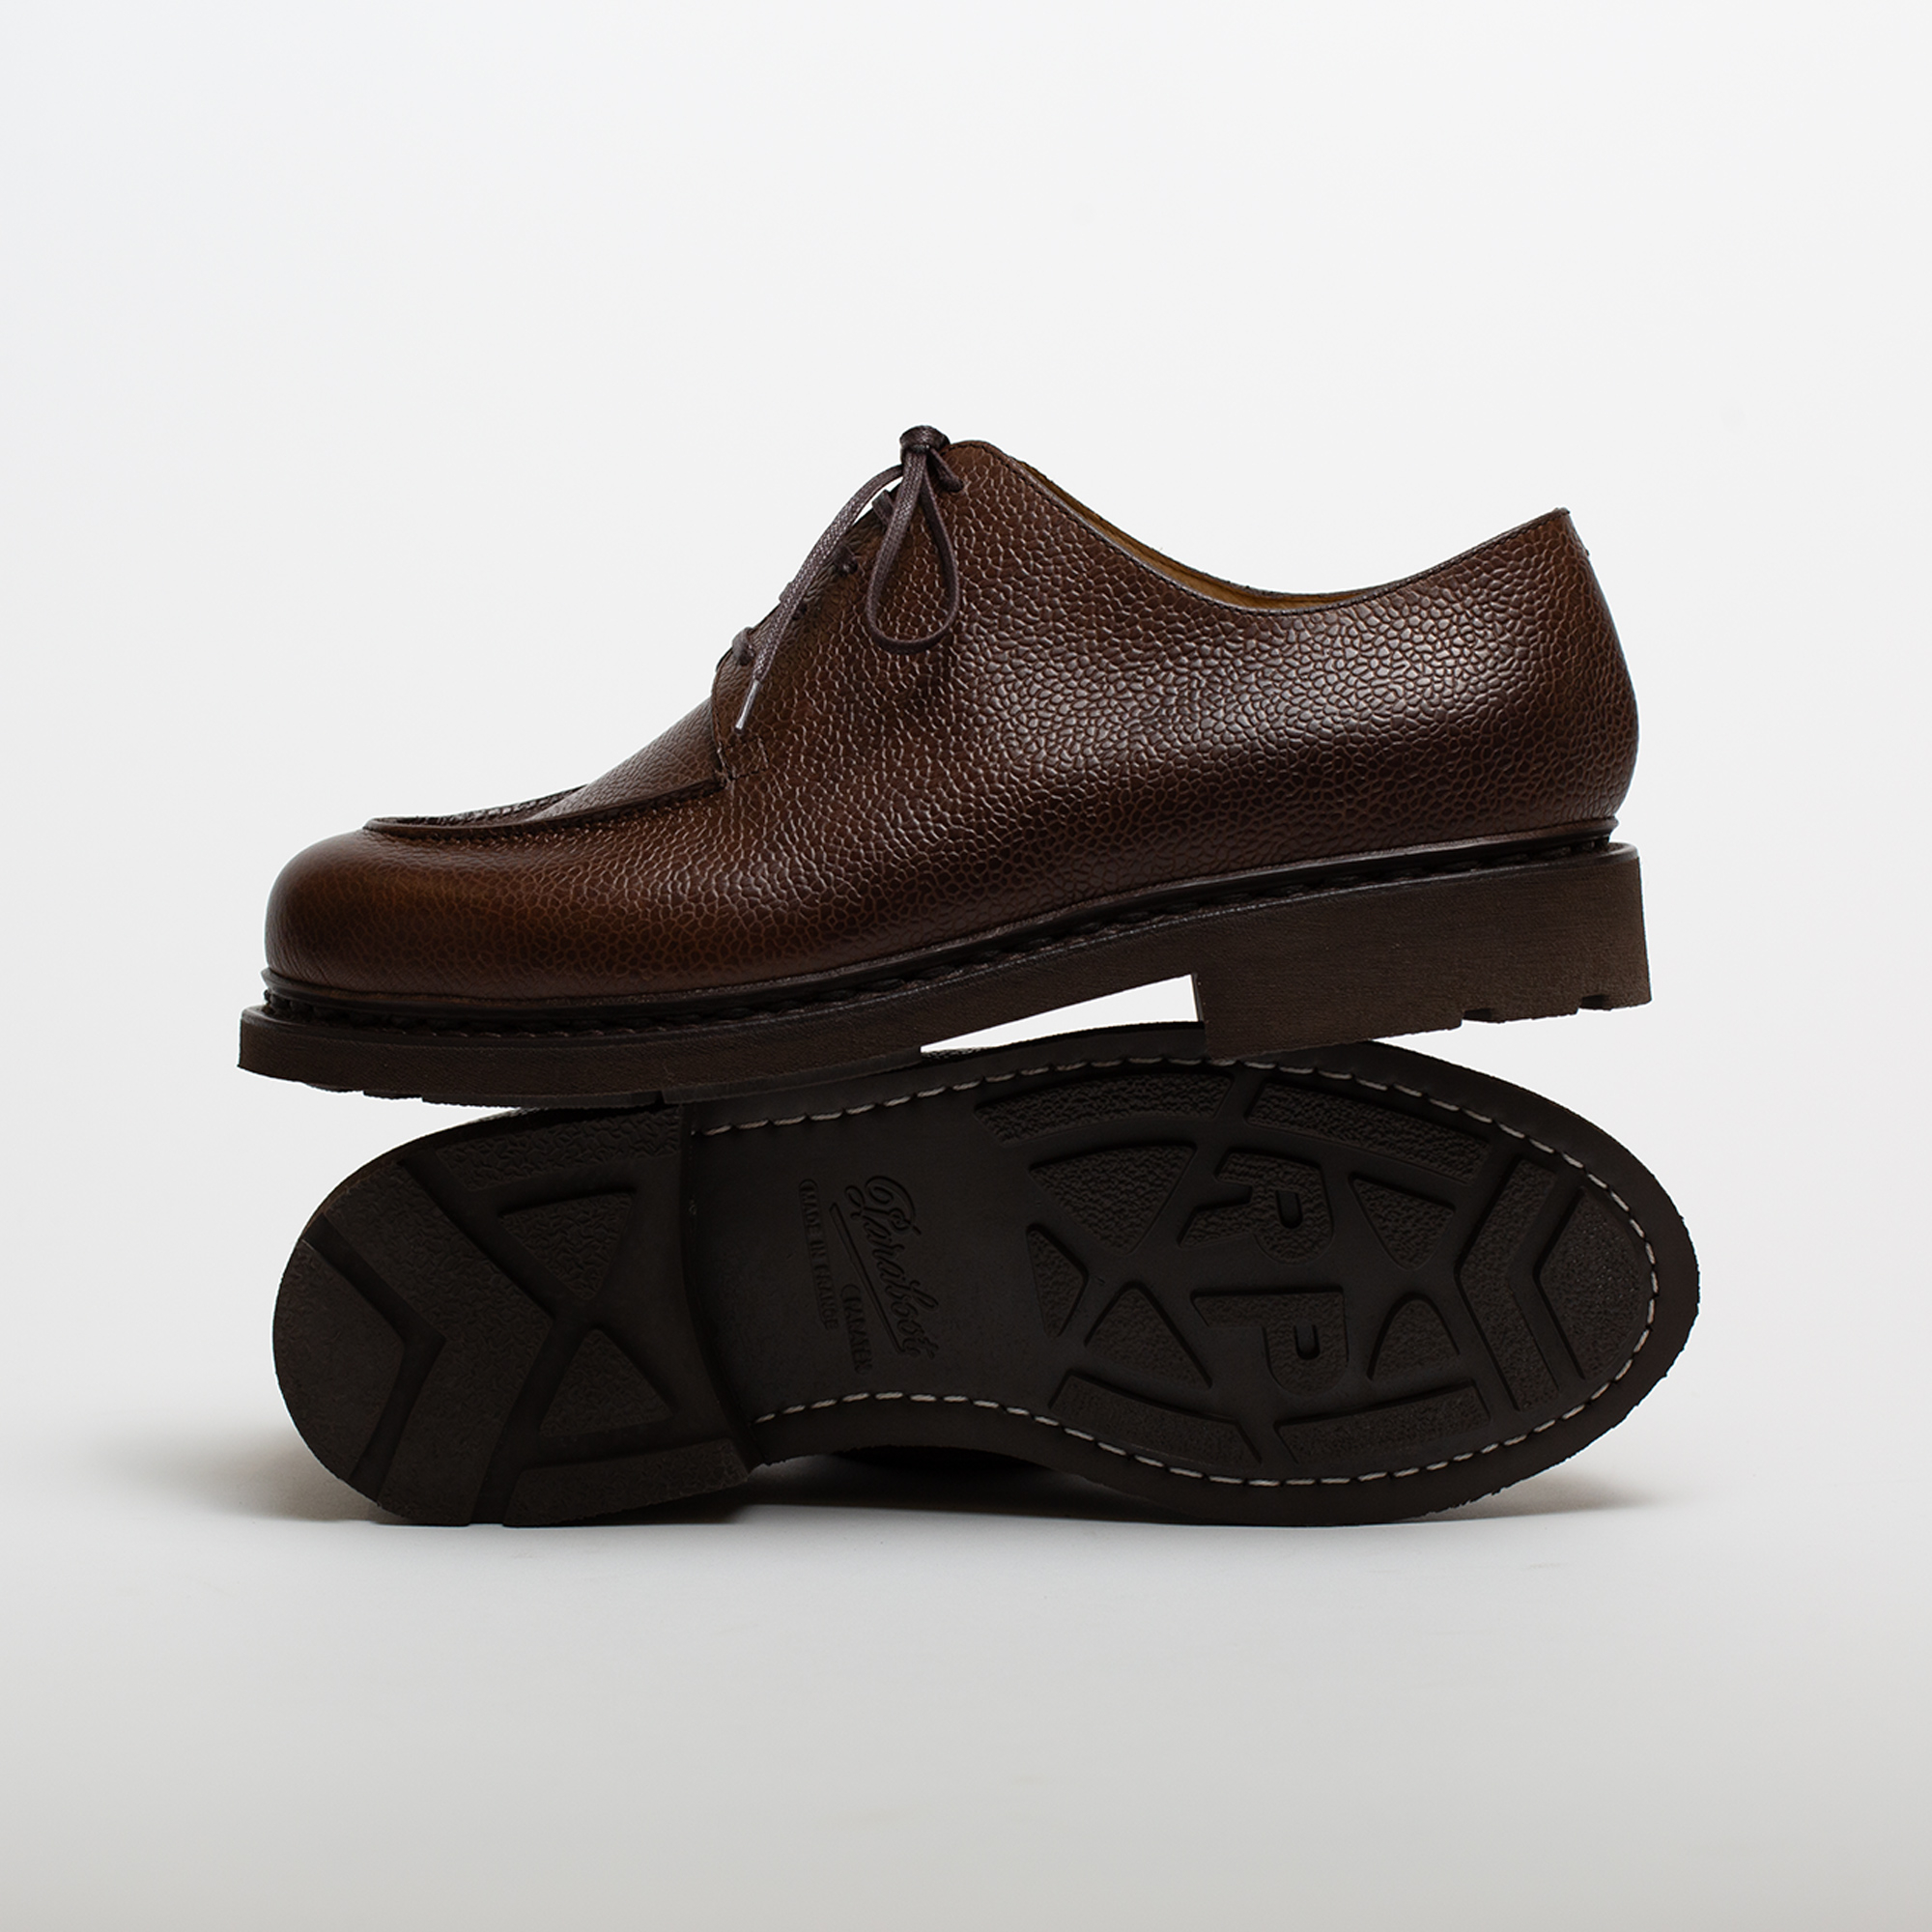 MIRAGE shoes in Brown color by Paraboot for Arpenteur